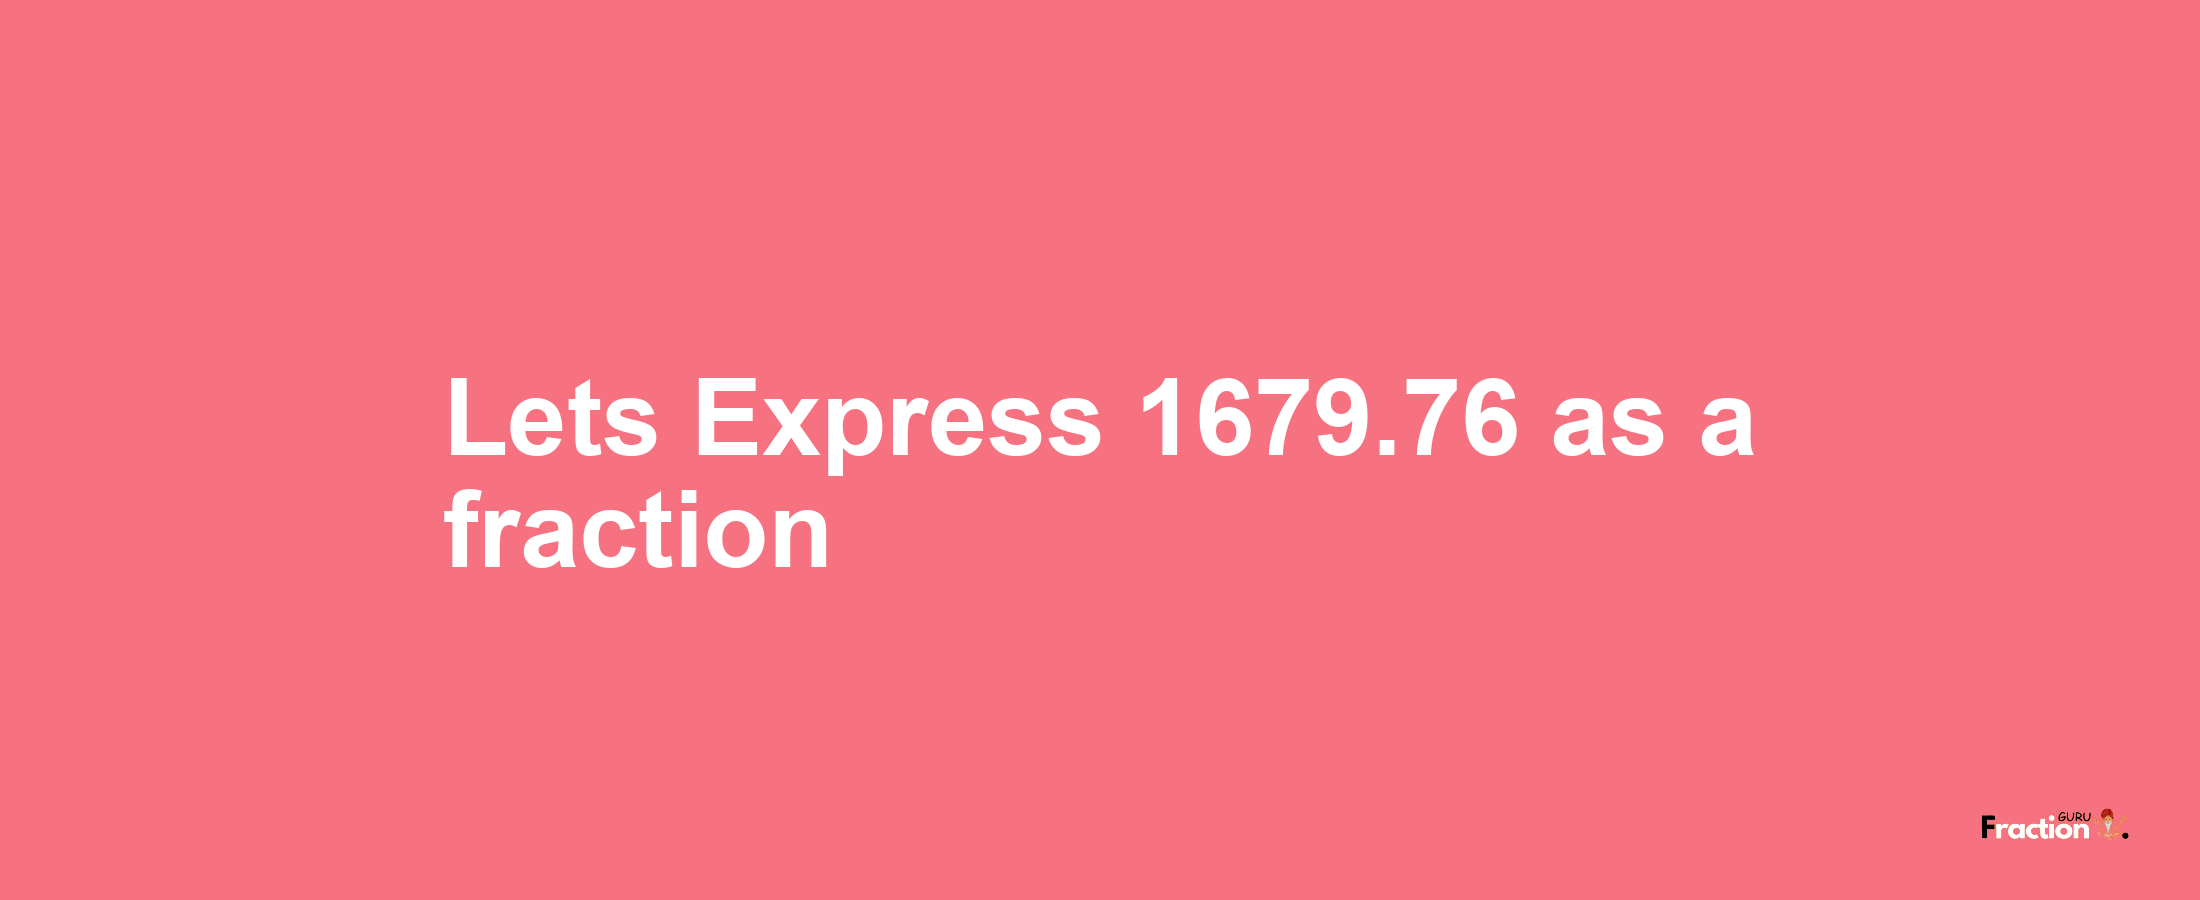 Lets Express 1679.76 as afraction